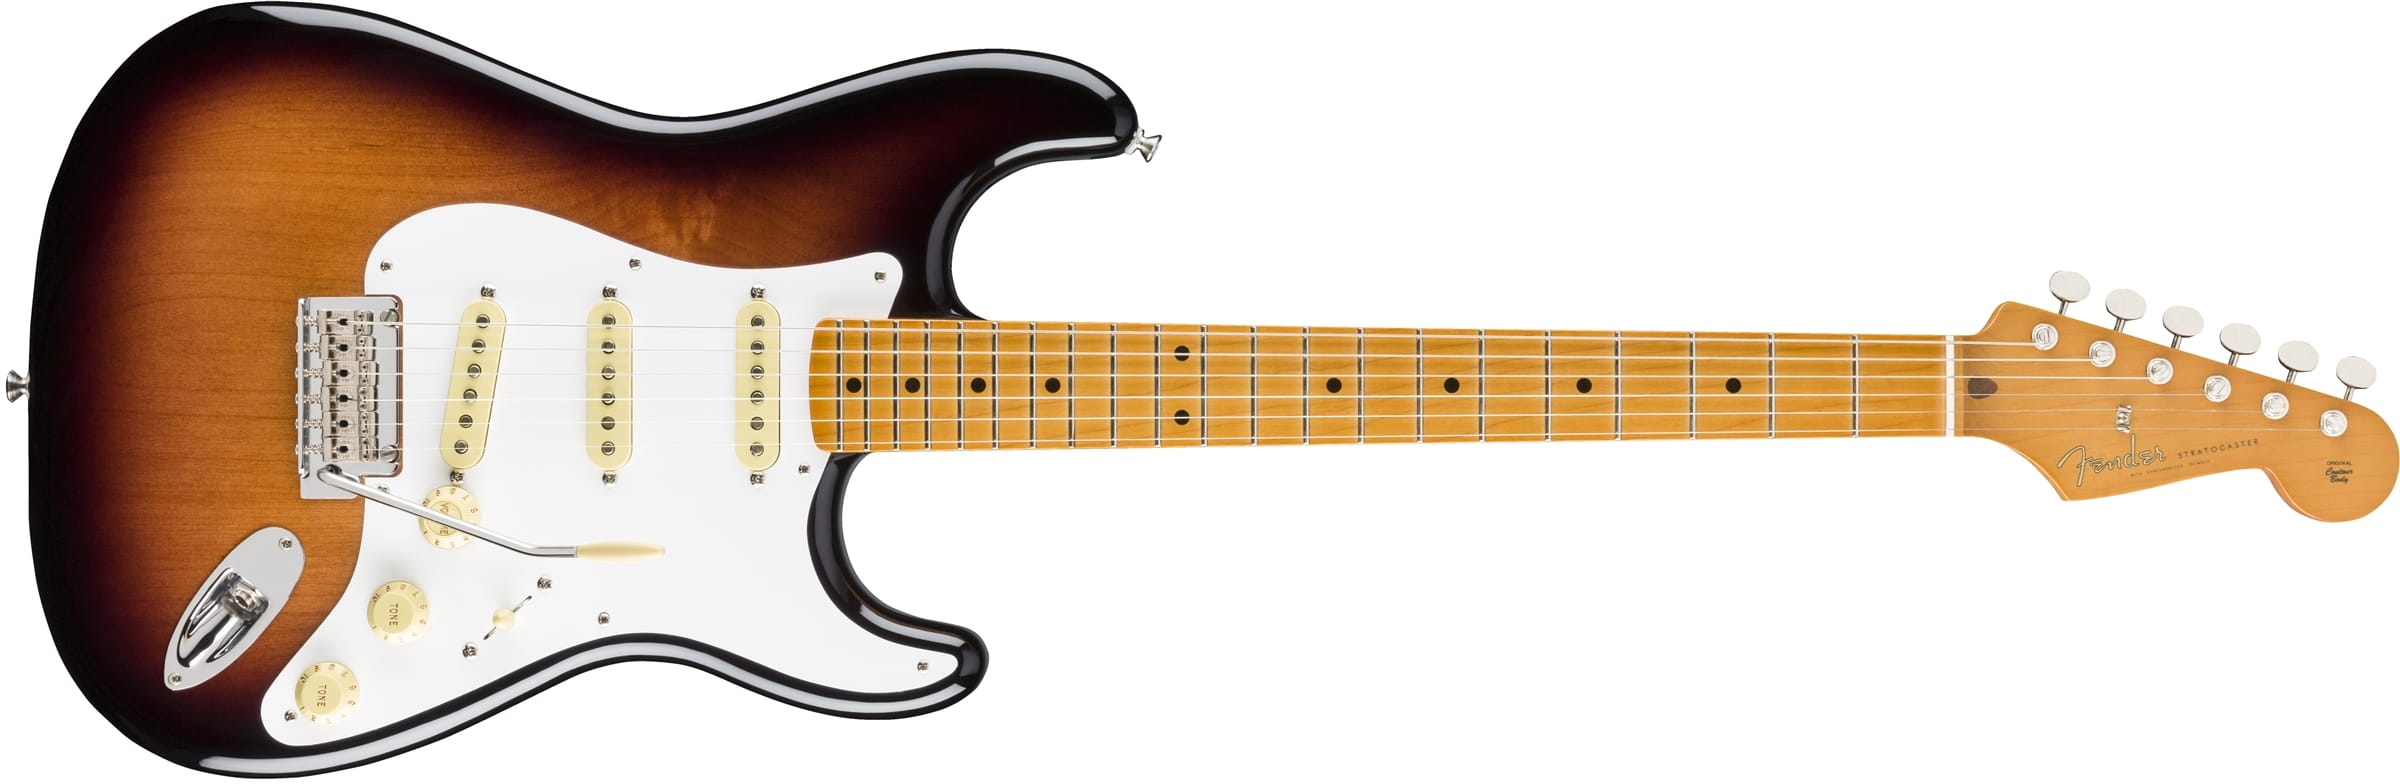 Fender Blends Style And Sound With Vintage-Inspired Campaign Launching New Vintera™ Series